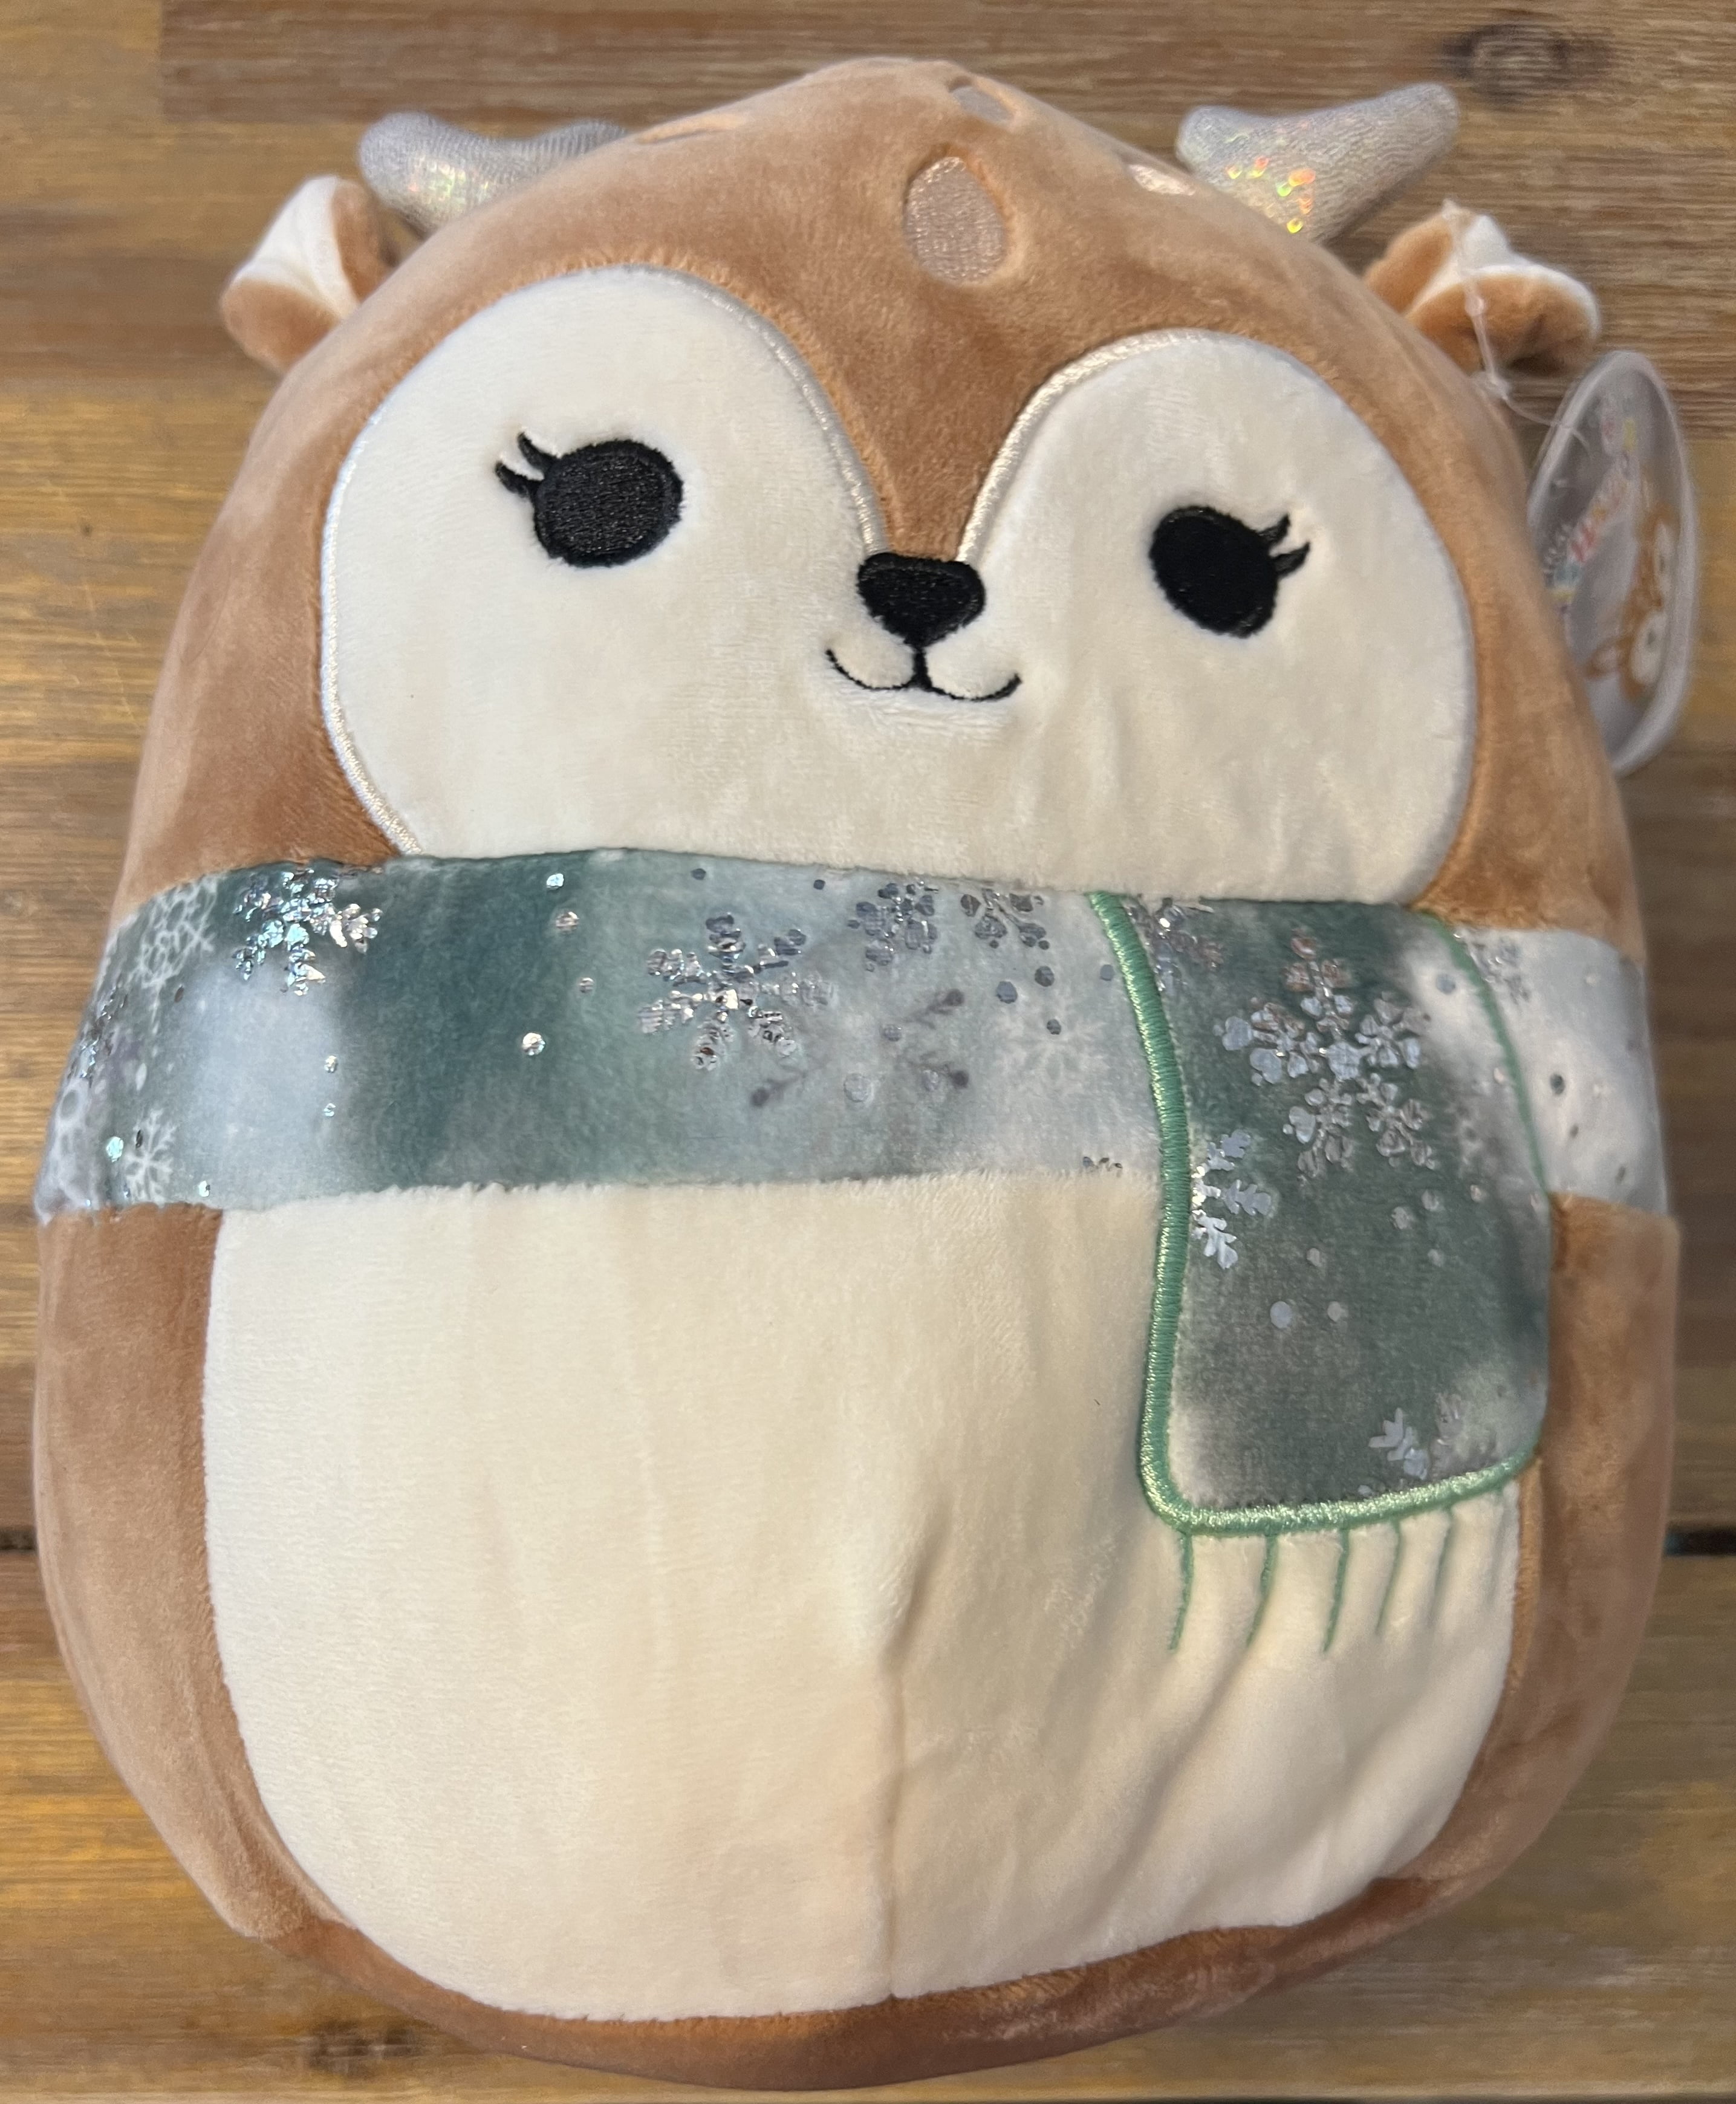 Cuddle Sawyer The 8 Inch Brown & Cream Squirrel Squishmallow Plush Hug Or Use As A Pillow. 